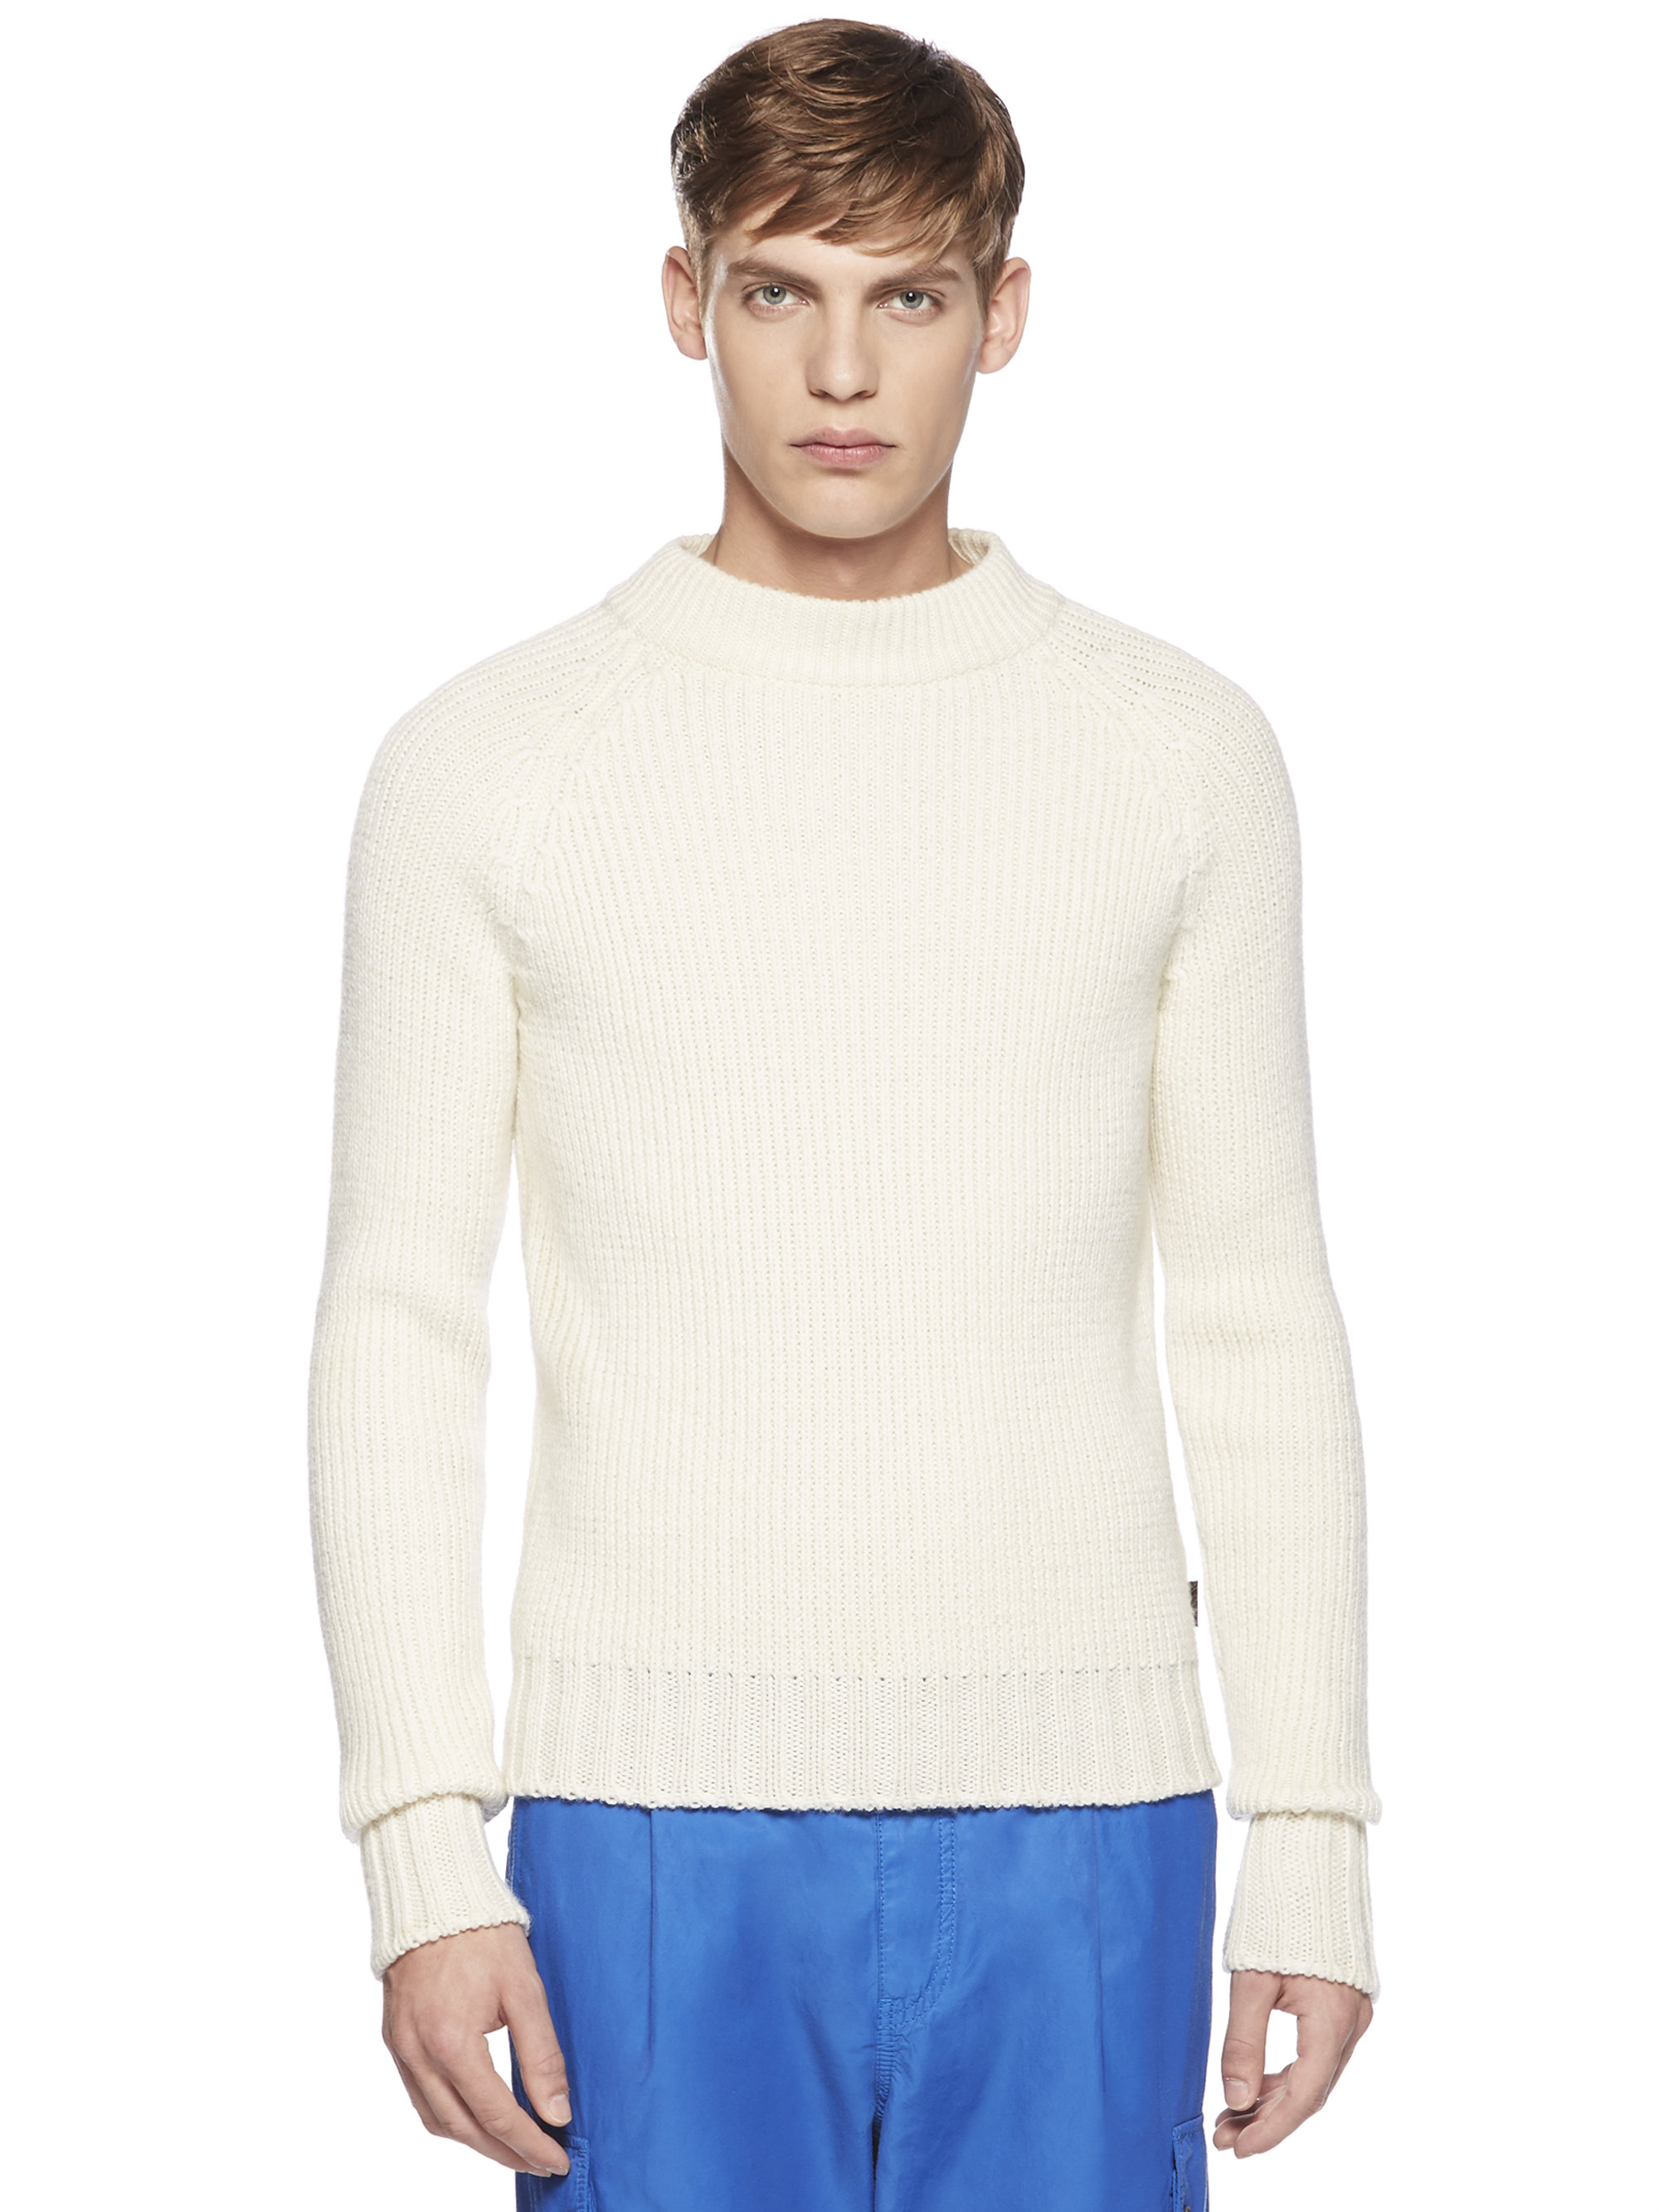 Gucci Wool Knit High Neck Sweater in White for Men | Lyst